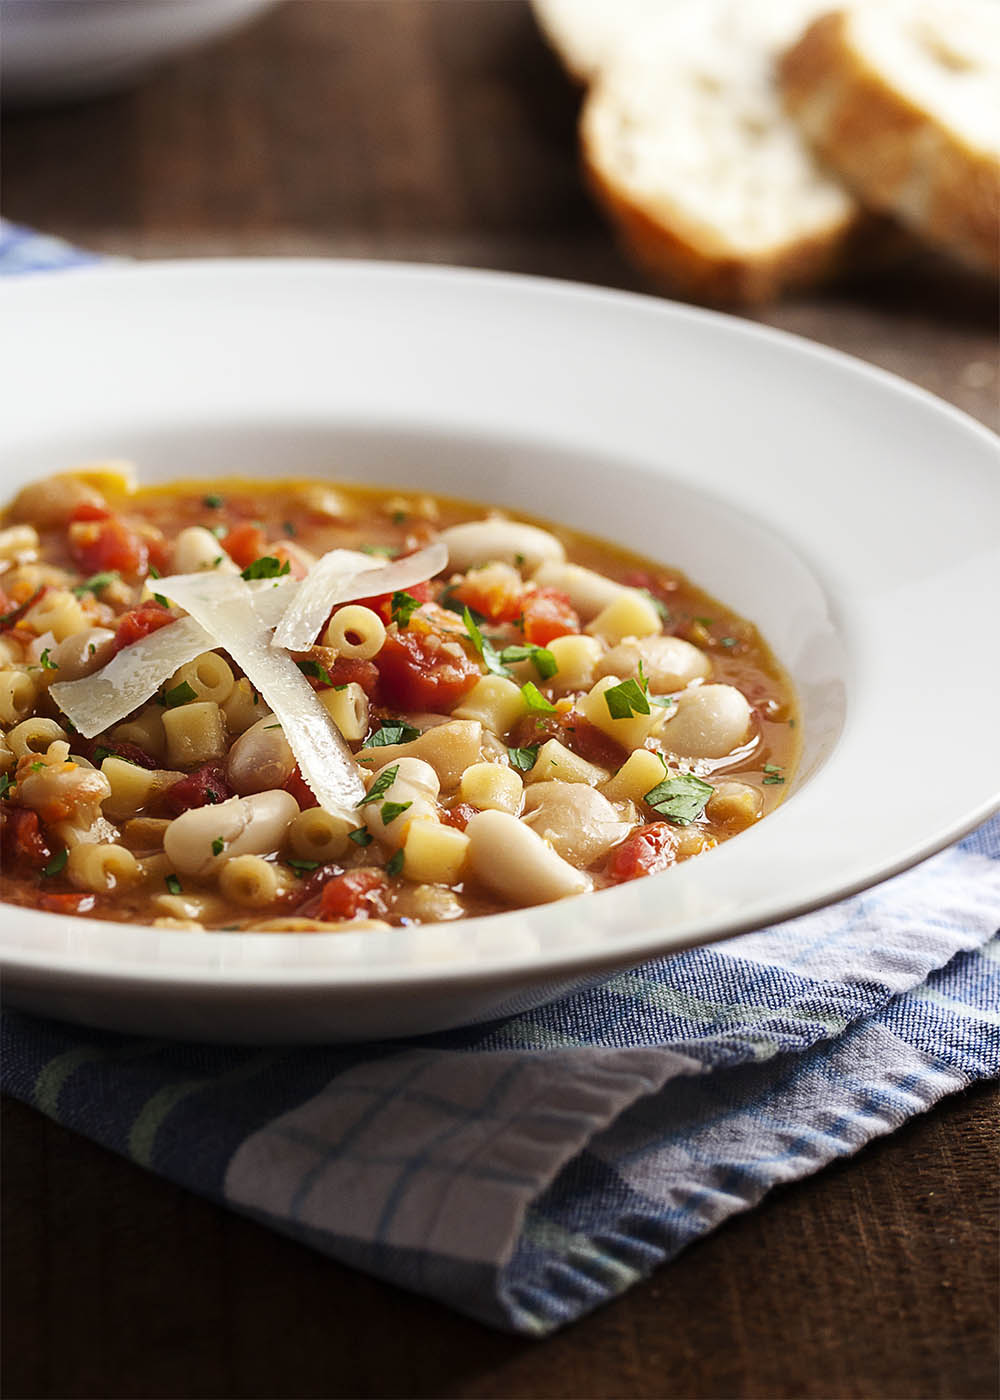 Pasta e Fagioli - Every Italian family has their own version of pasta and bean soup. Mine is light on the tomatoes, with plenty of pancetta, and a rich, flavorful broth. | justalittlebitofbacon.com